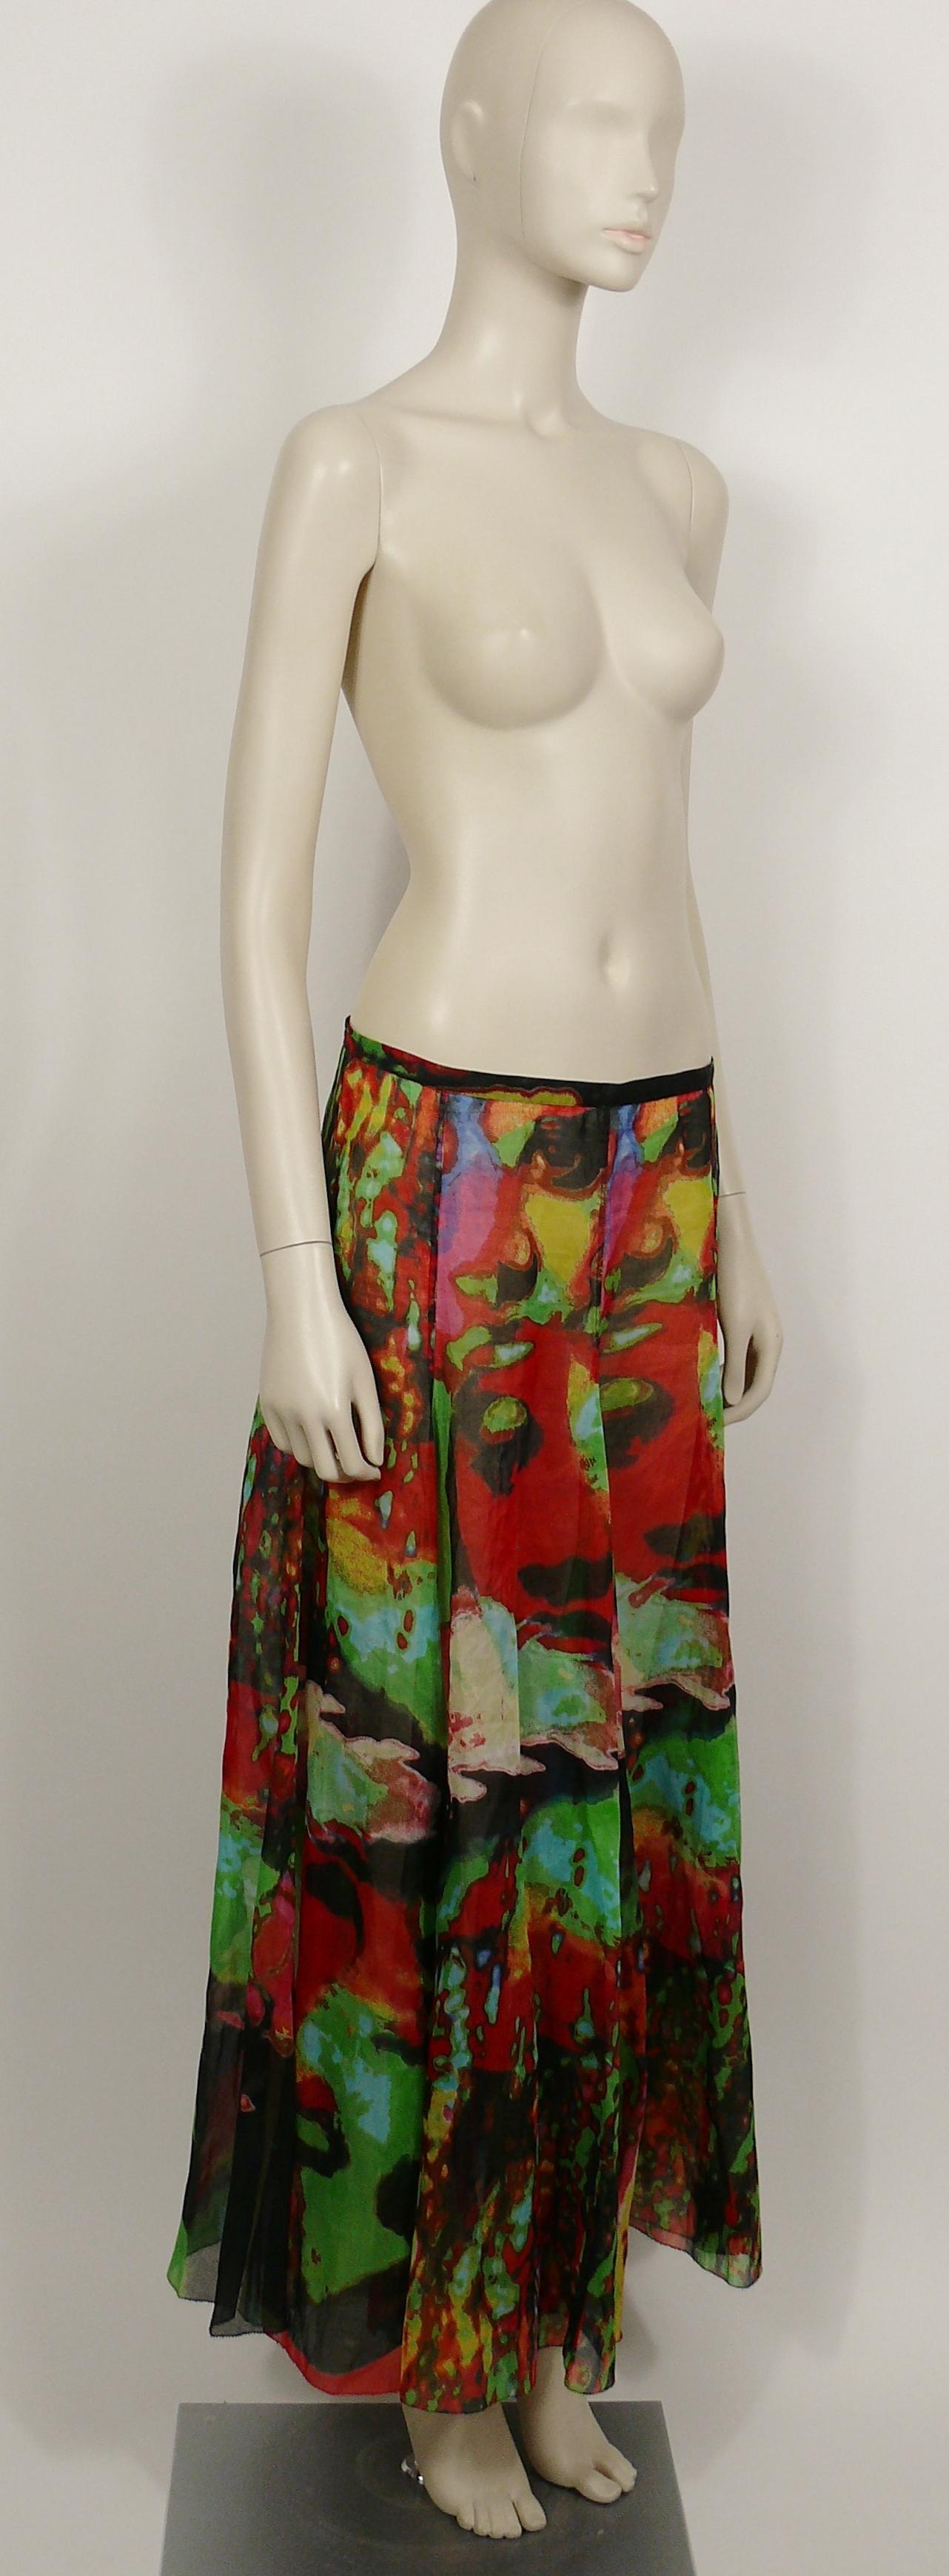 JEAN PAUL GAULTIER vintage sheer maxi skirt from the Spring/Summer Ready-to Wear Collection featuring faces in vibrant colors.

This dress is made of a kind of sheer semi rigid cotton veil.
Side buttoning.

Label reads JEAN PAUL GAULTIER Femme.
Made